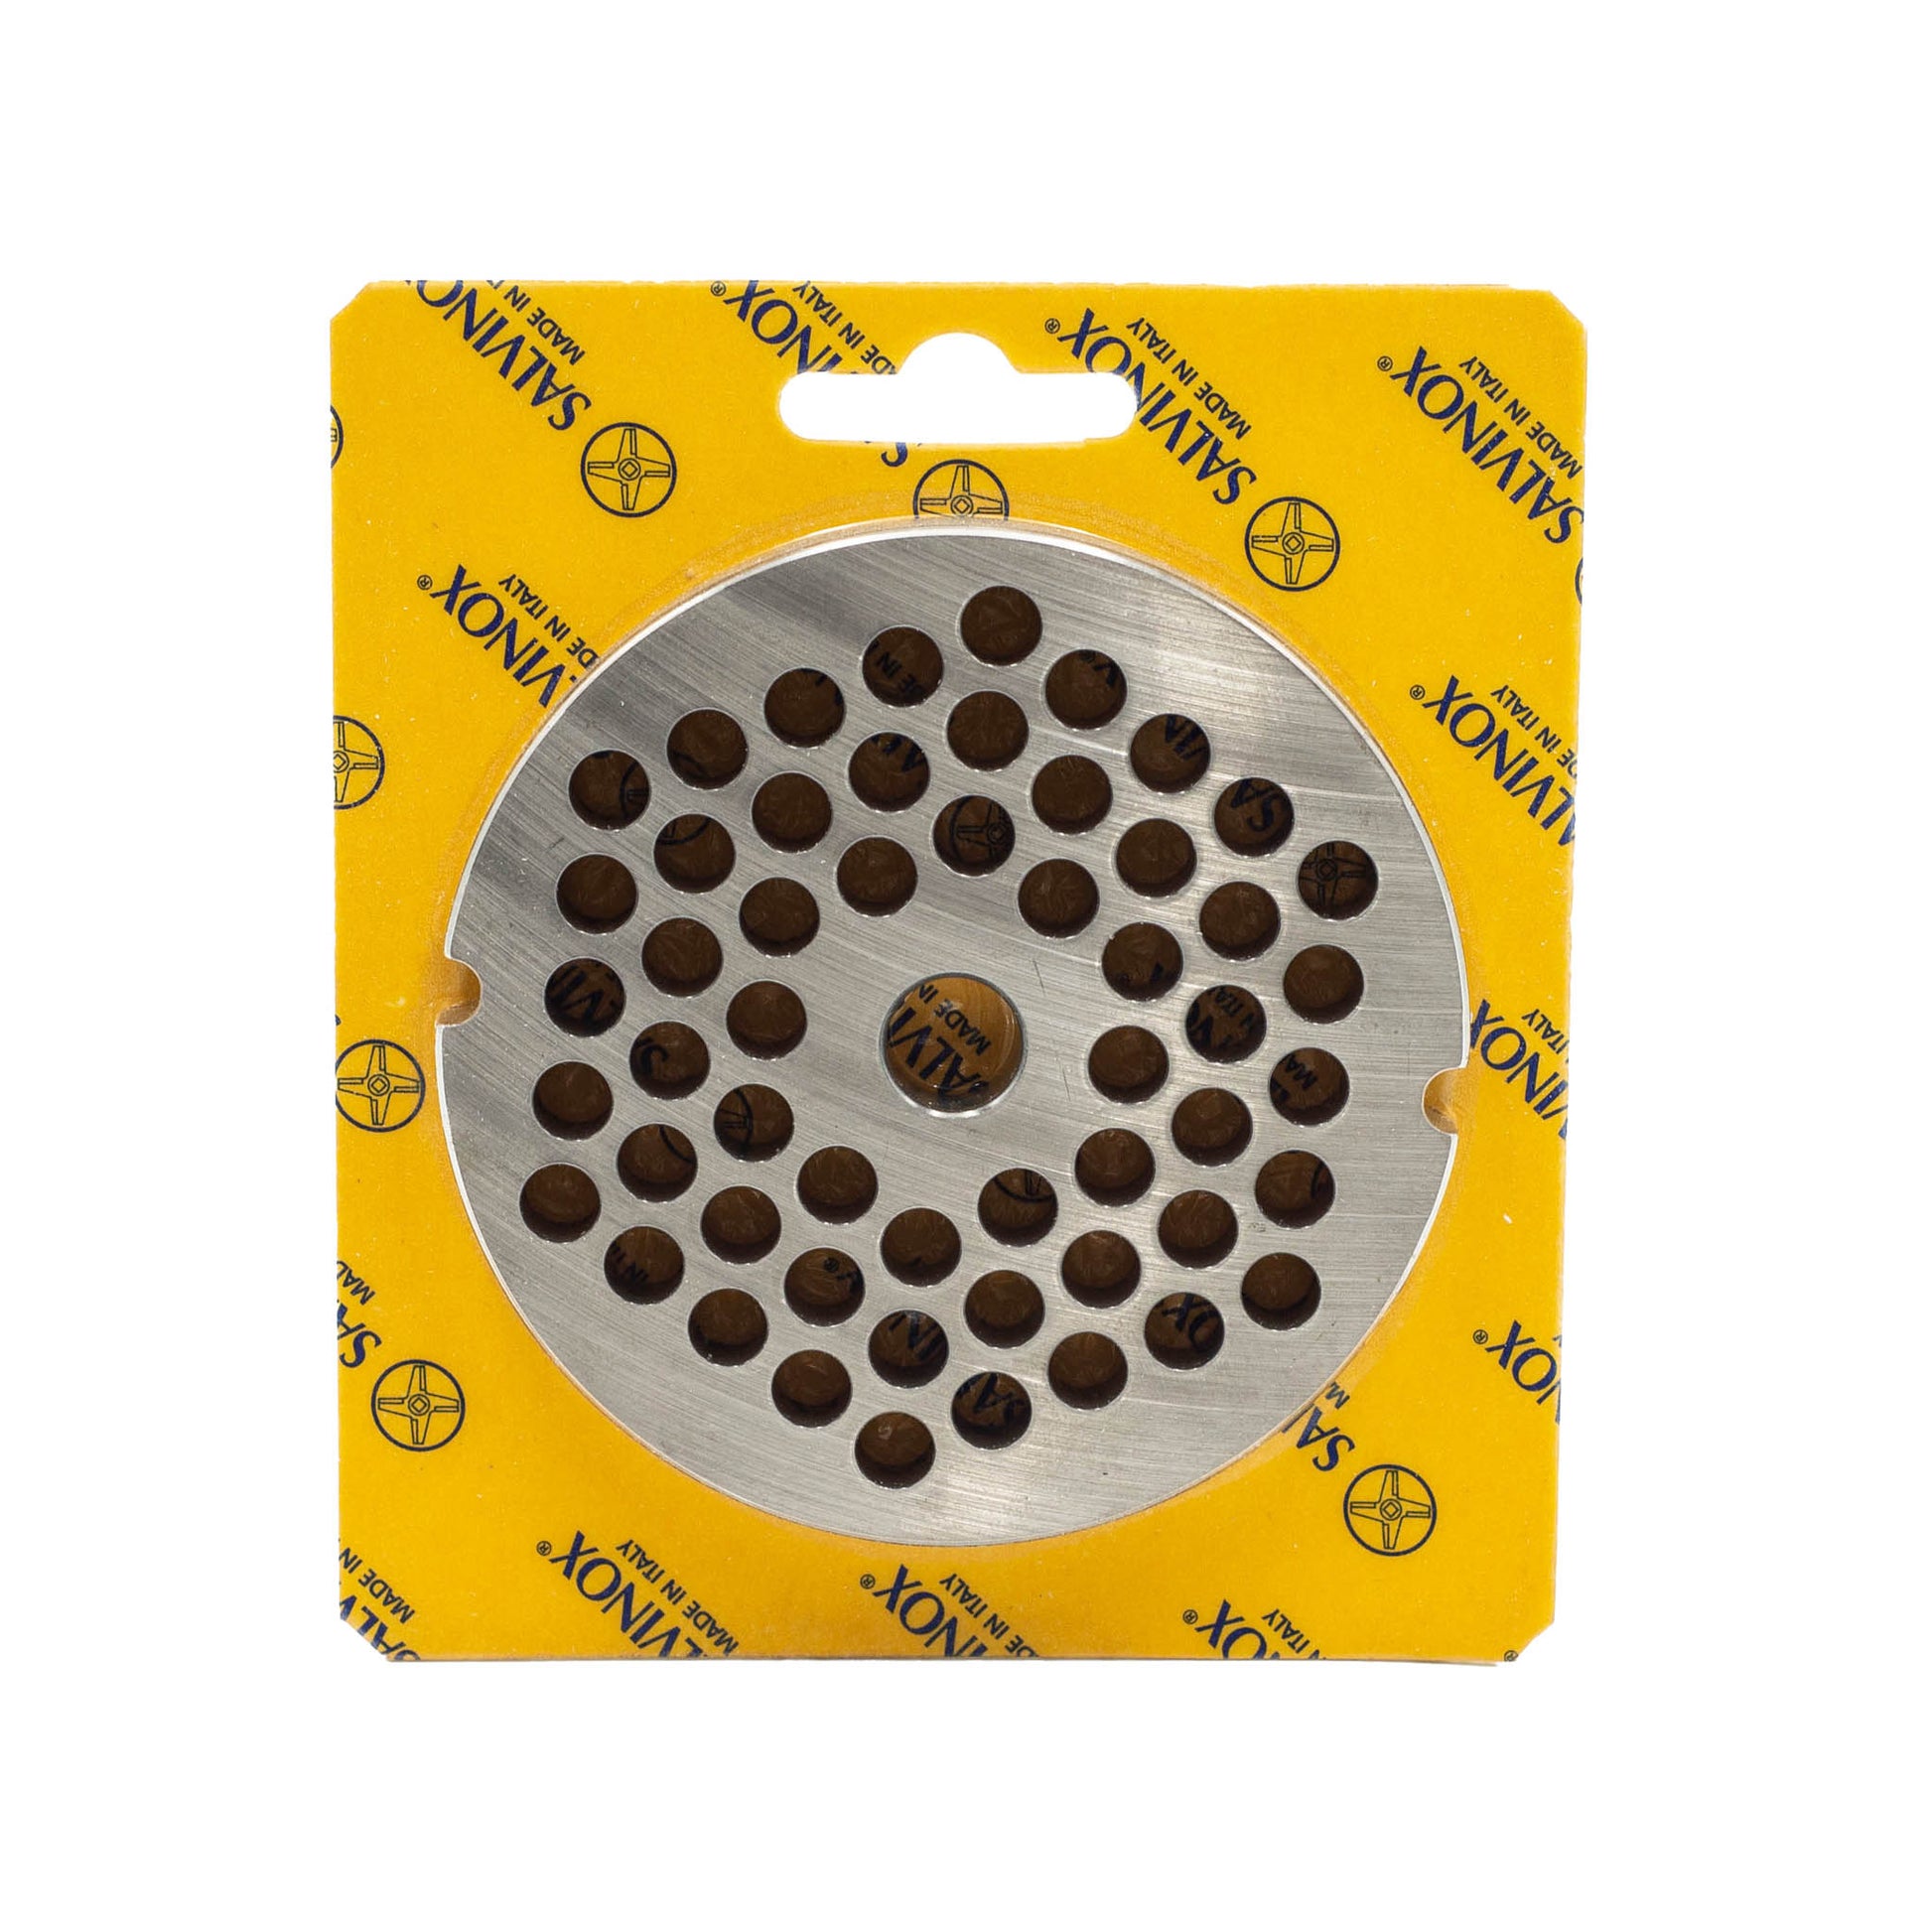 Size 32 with 8mm holes stainless steel replacement mincer plate for salami and sausage mincing machines. 